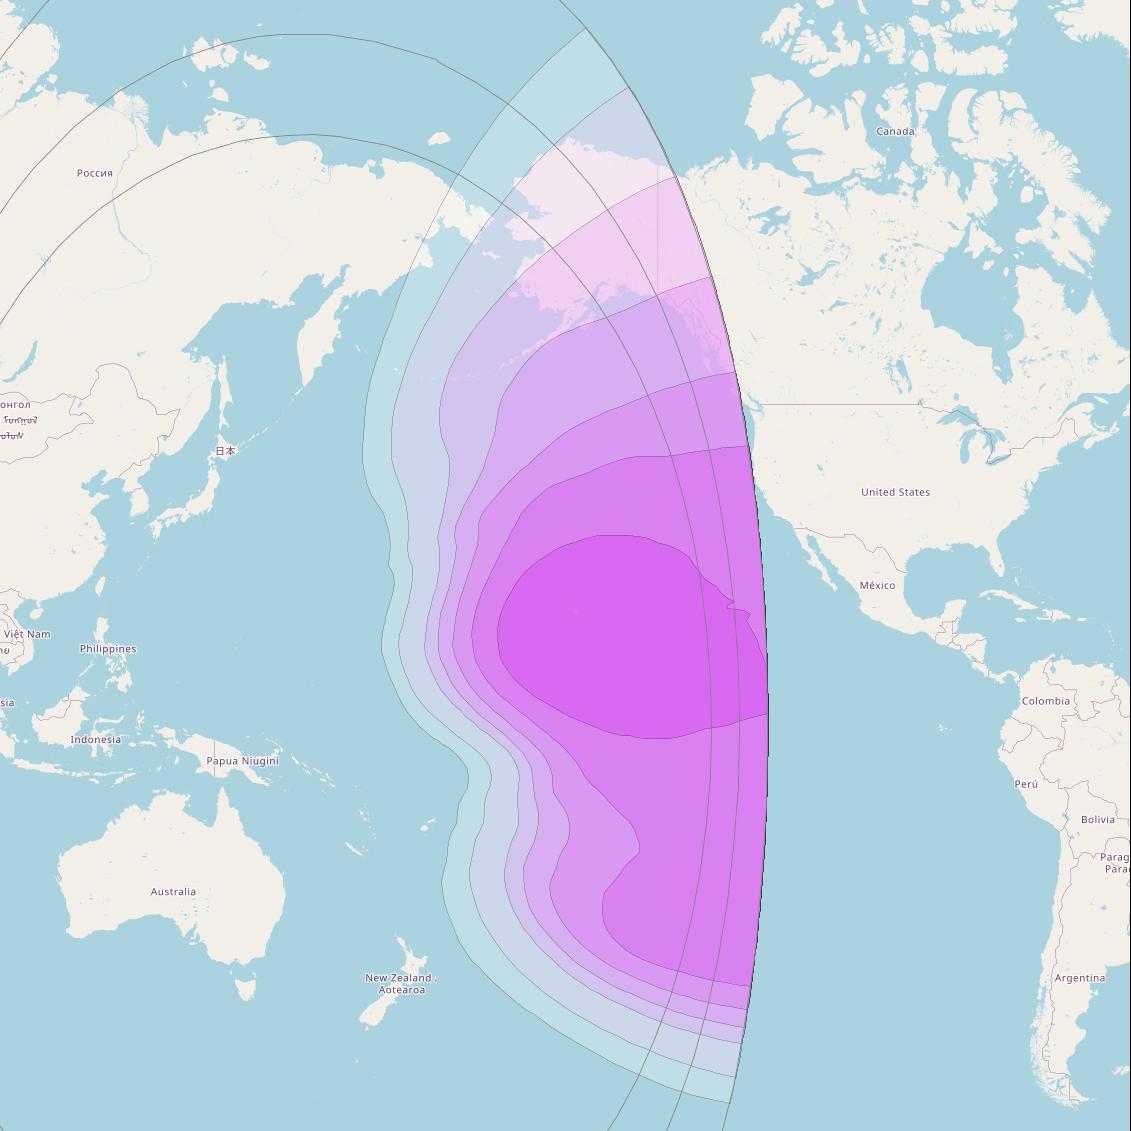 Intelsat 1R at 157° E downlink C-band East Pacific beam coverage map